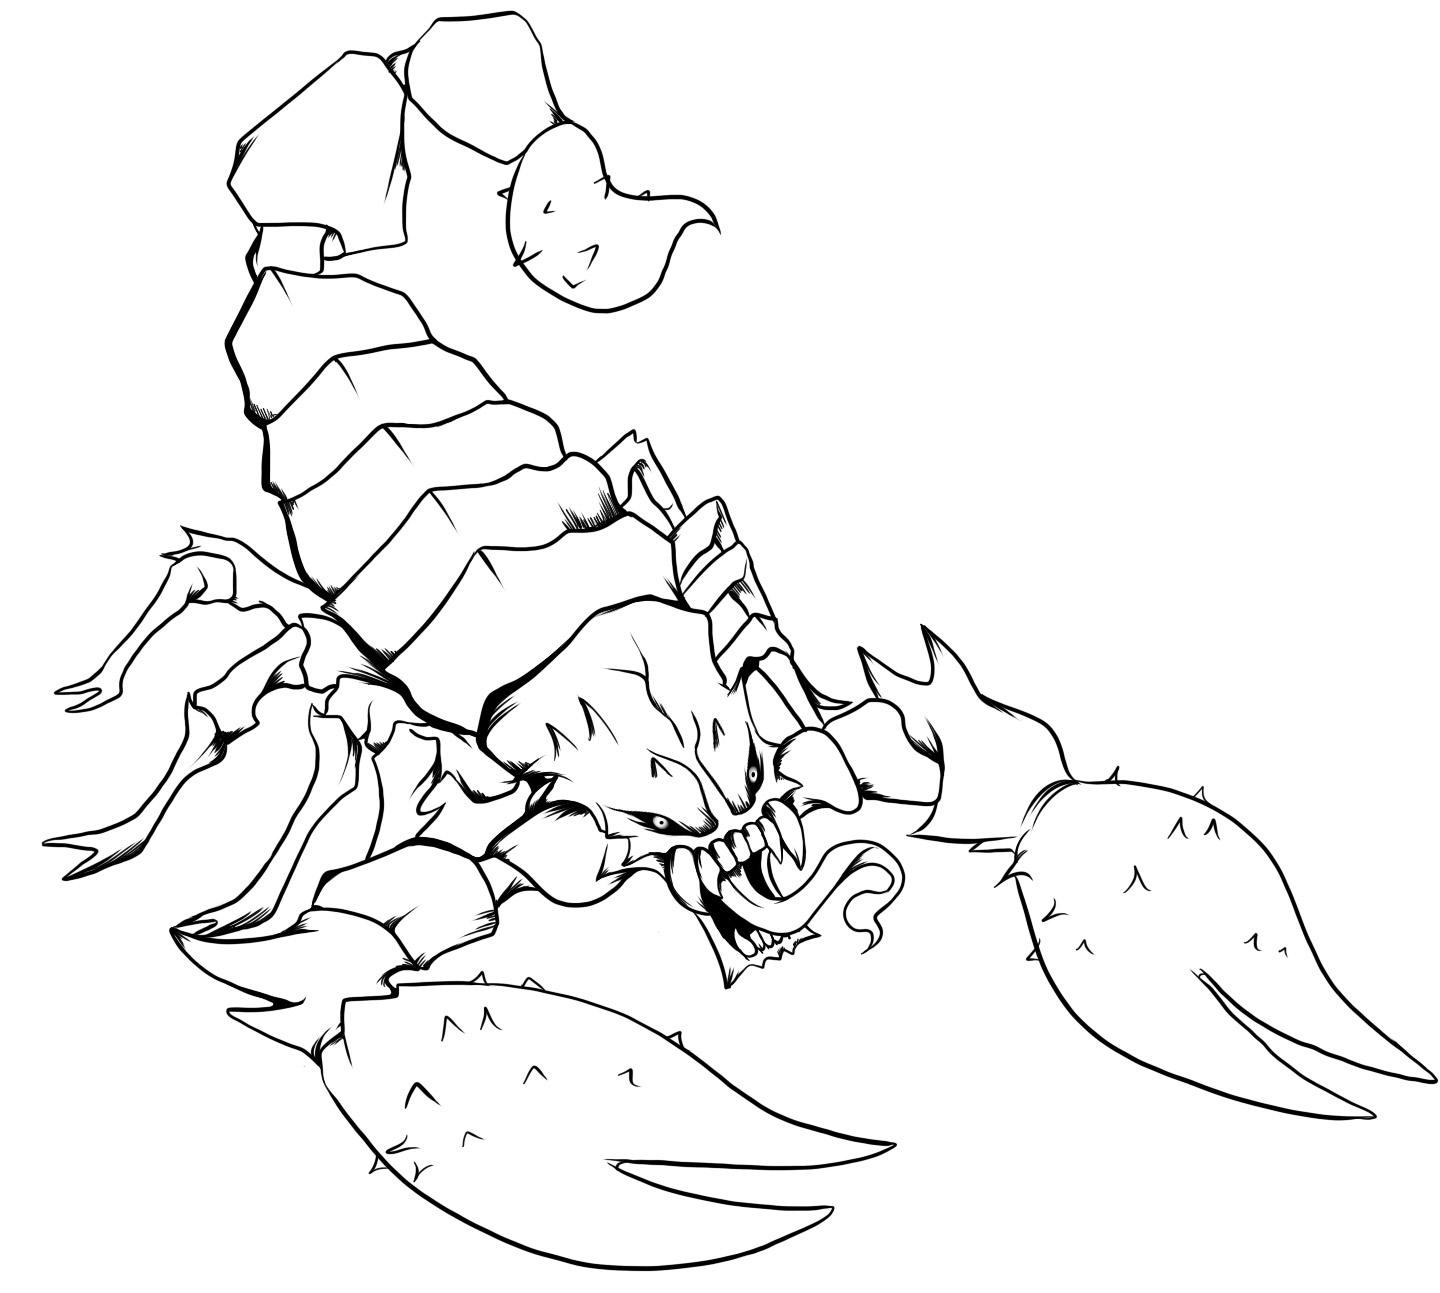 Download Free Printable Scorpion Coloring Pages For Kids